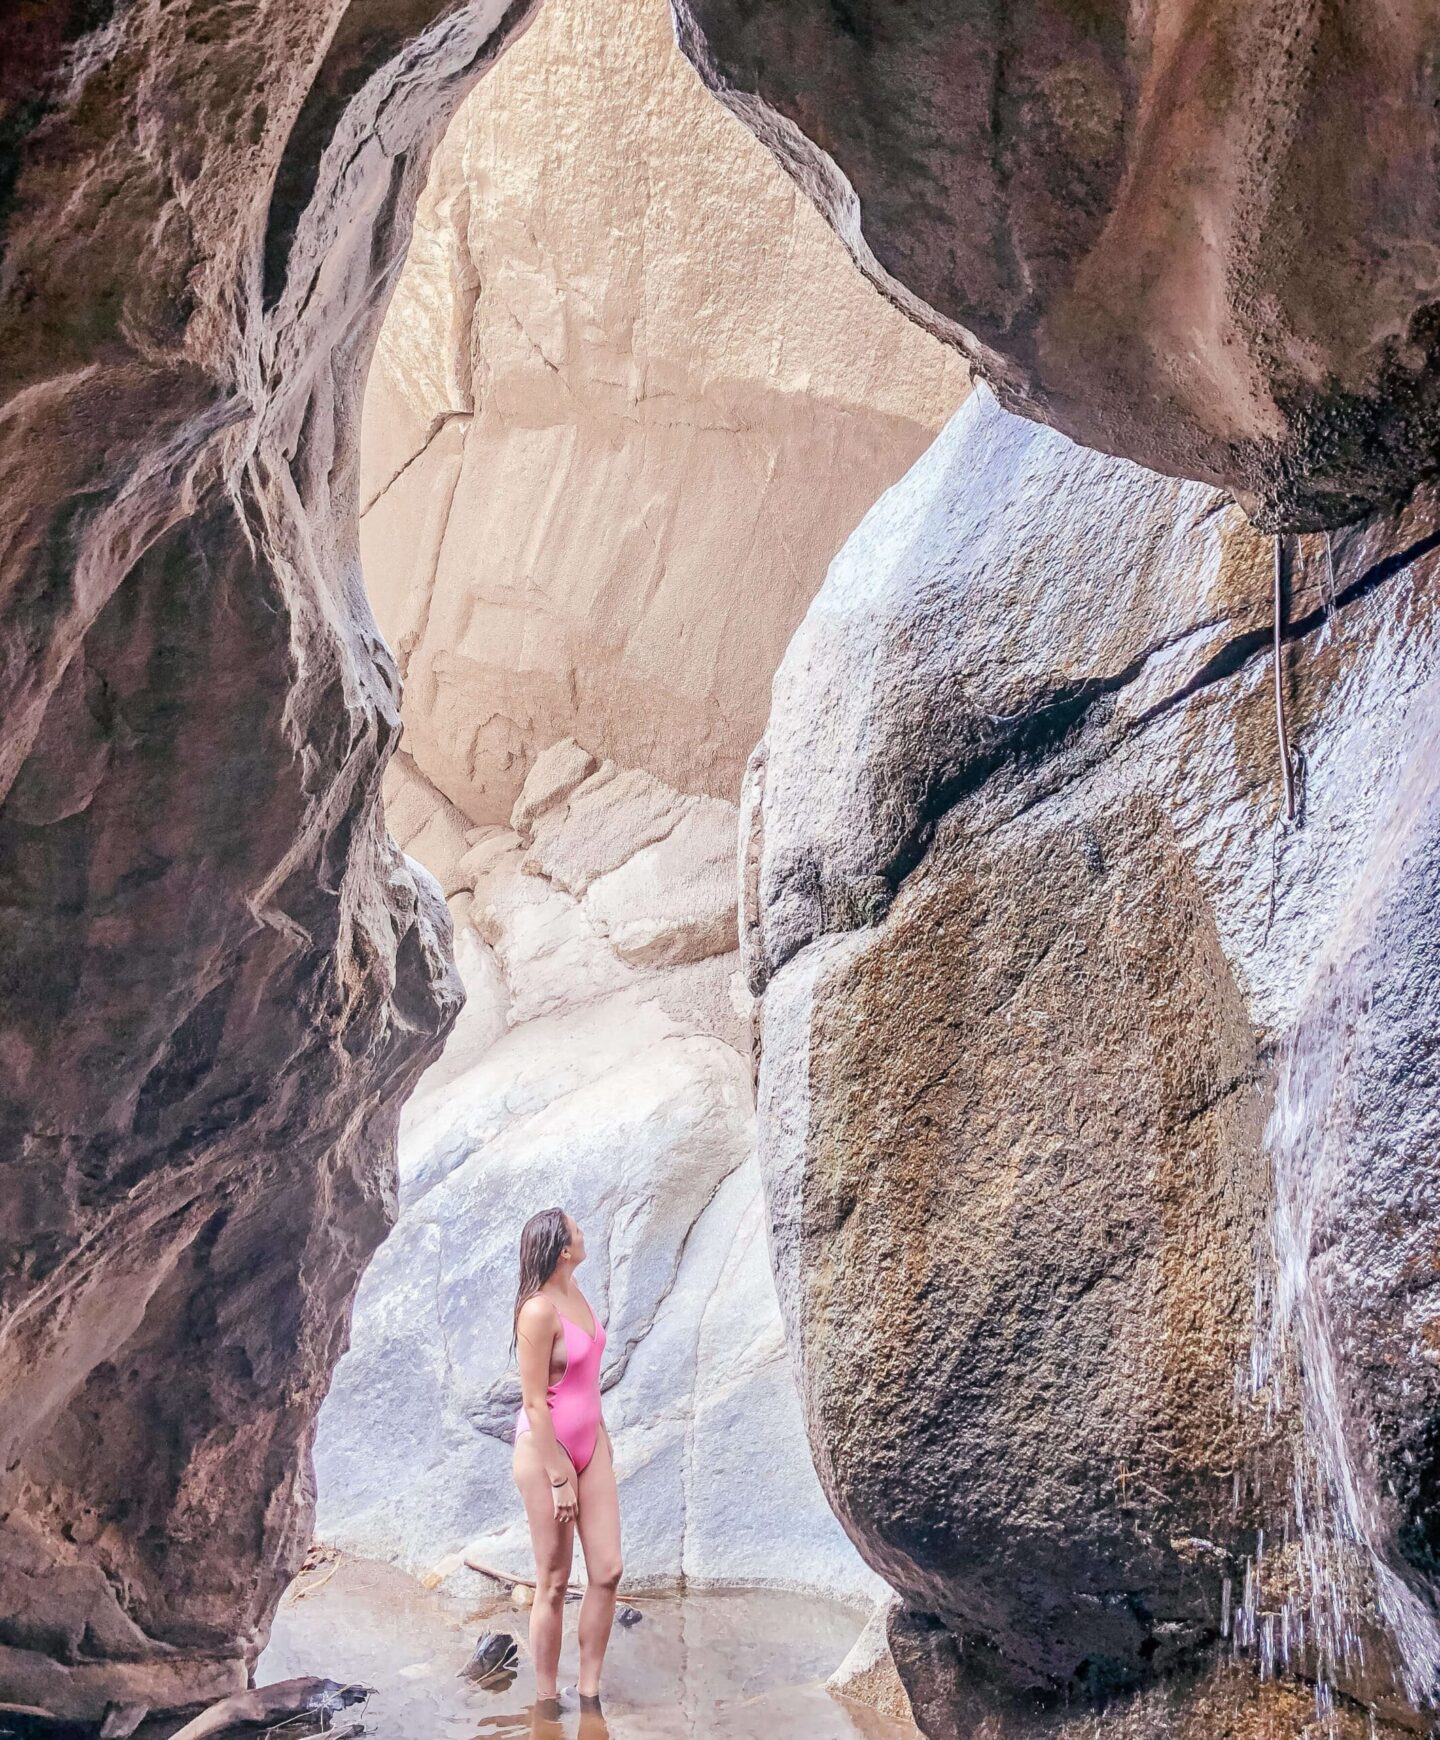 A girl in a pink bathing suit looks up at a canyon while hiking through Indian Canyon Trails in Palm Springs